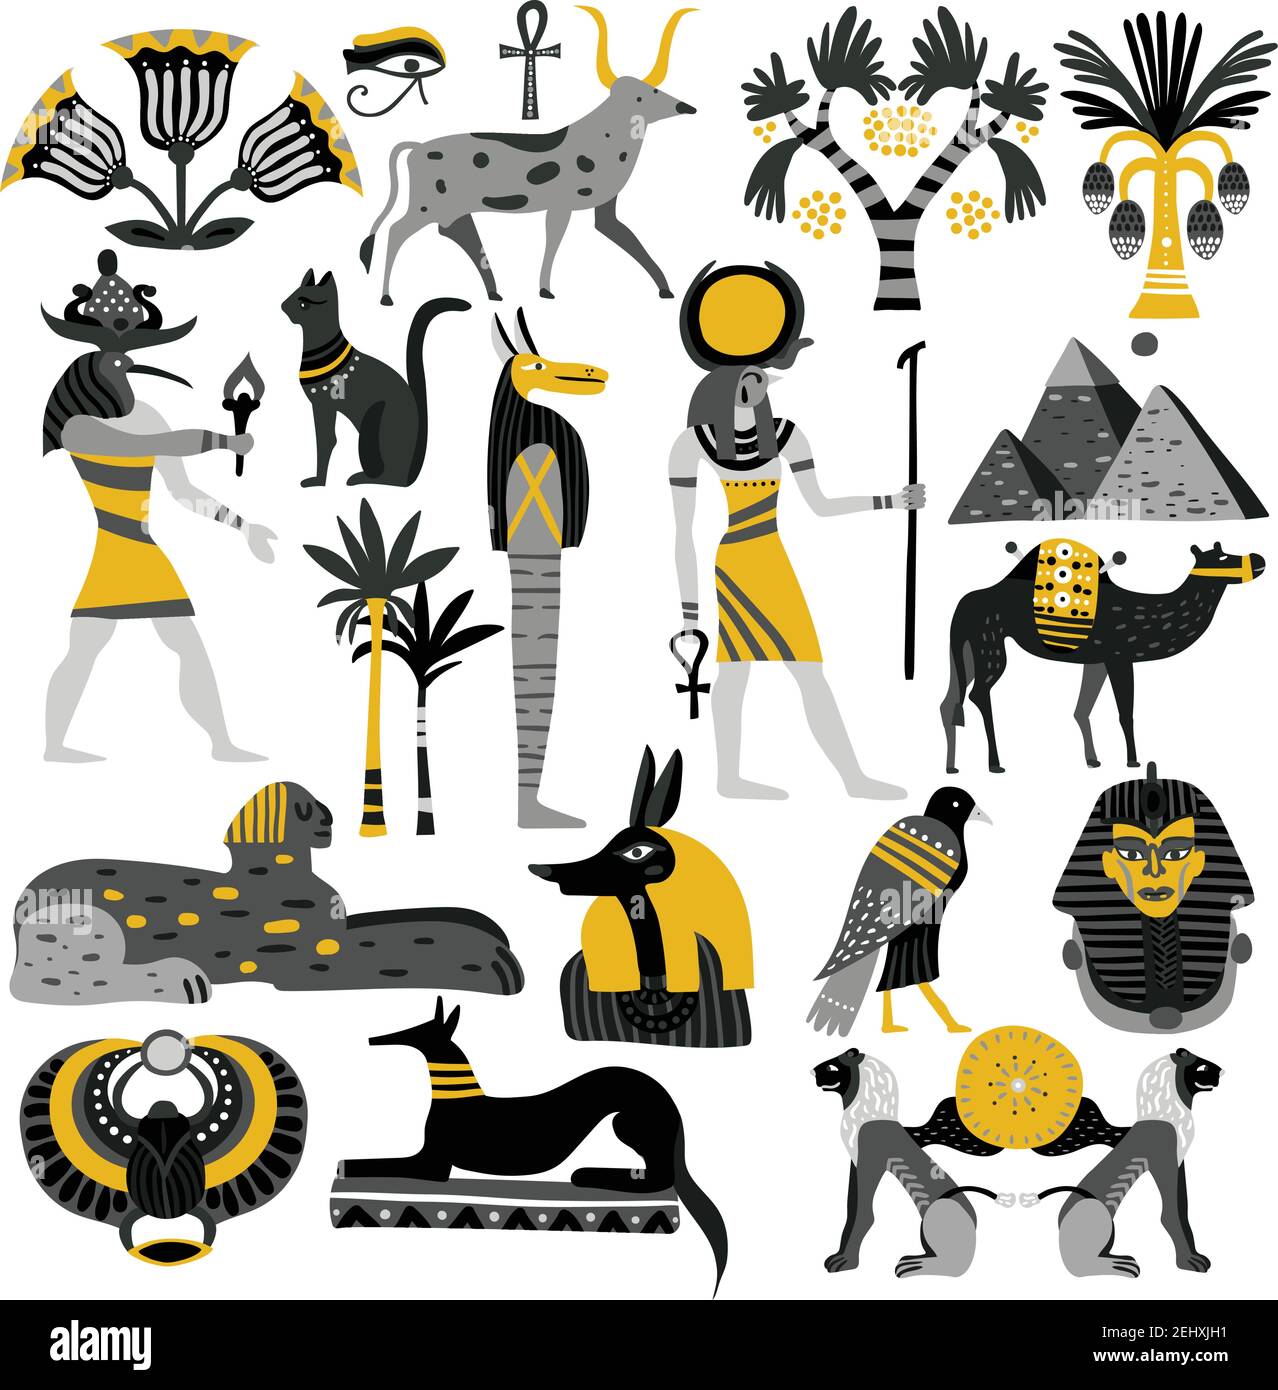 Egypt set of decorative icons with ancient gods, sphinx, scarab, pyramids, palm trees, ankh isolated vector illustration Stock Vector